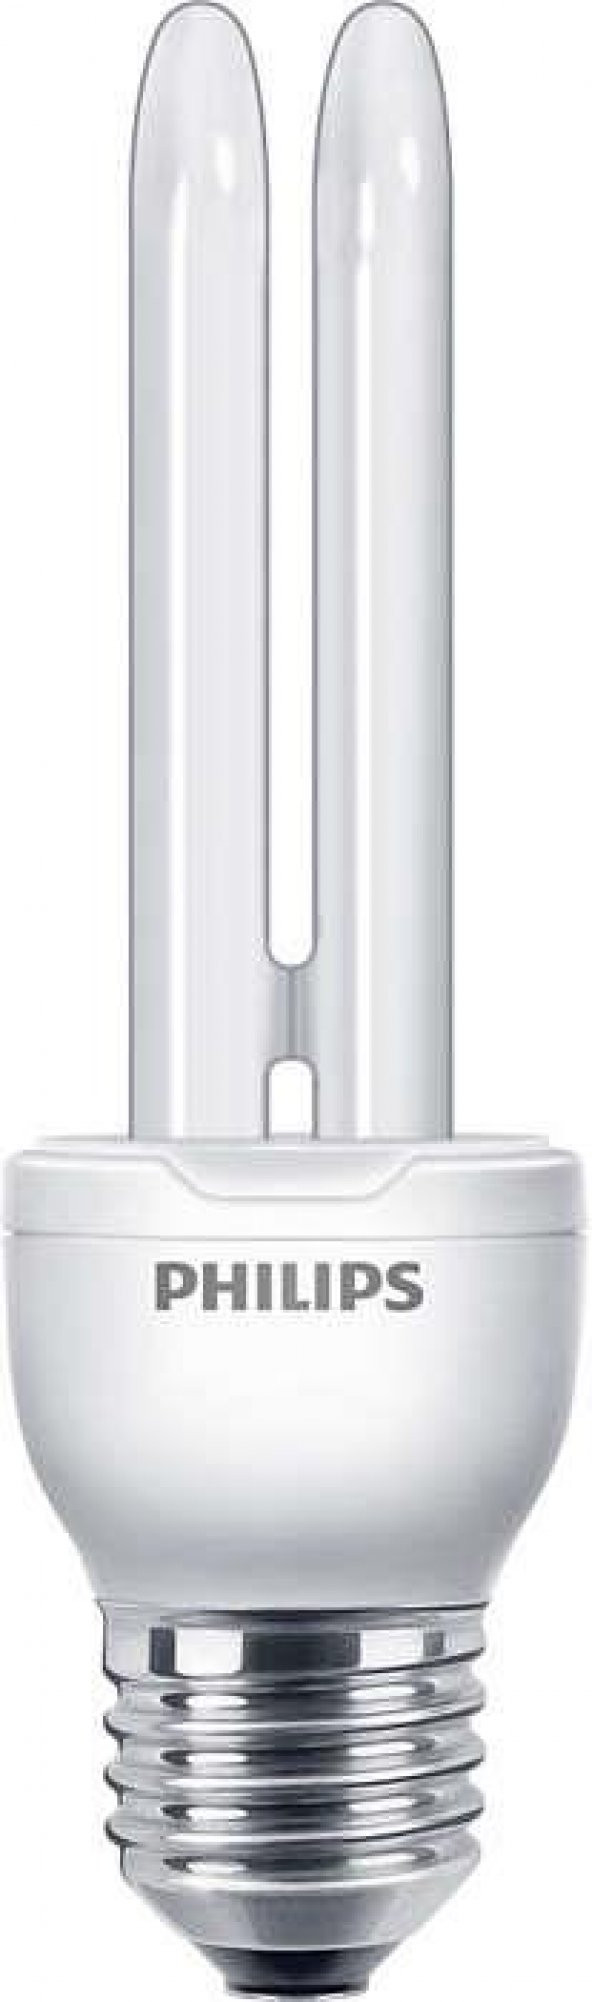 PHILIPS SMALL 11W E27 BEYAZ KALIN DUY AMPUL